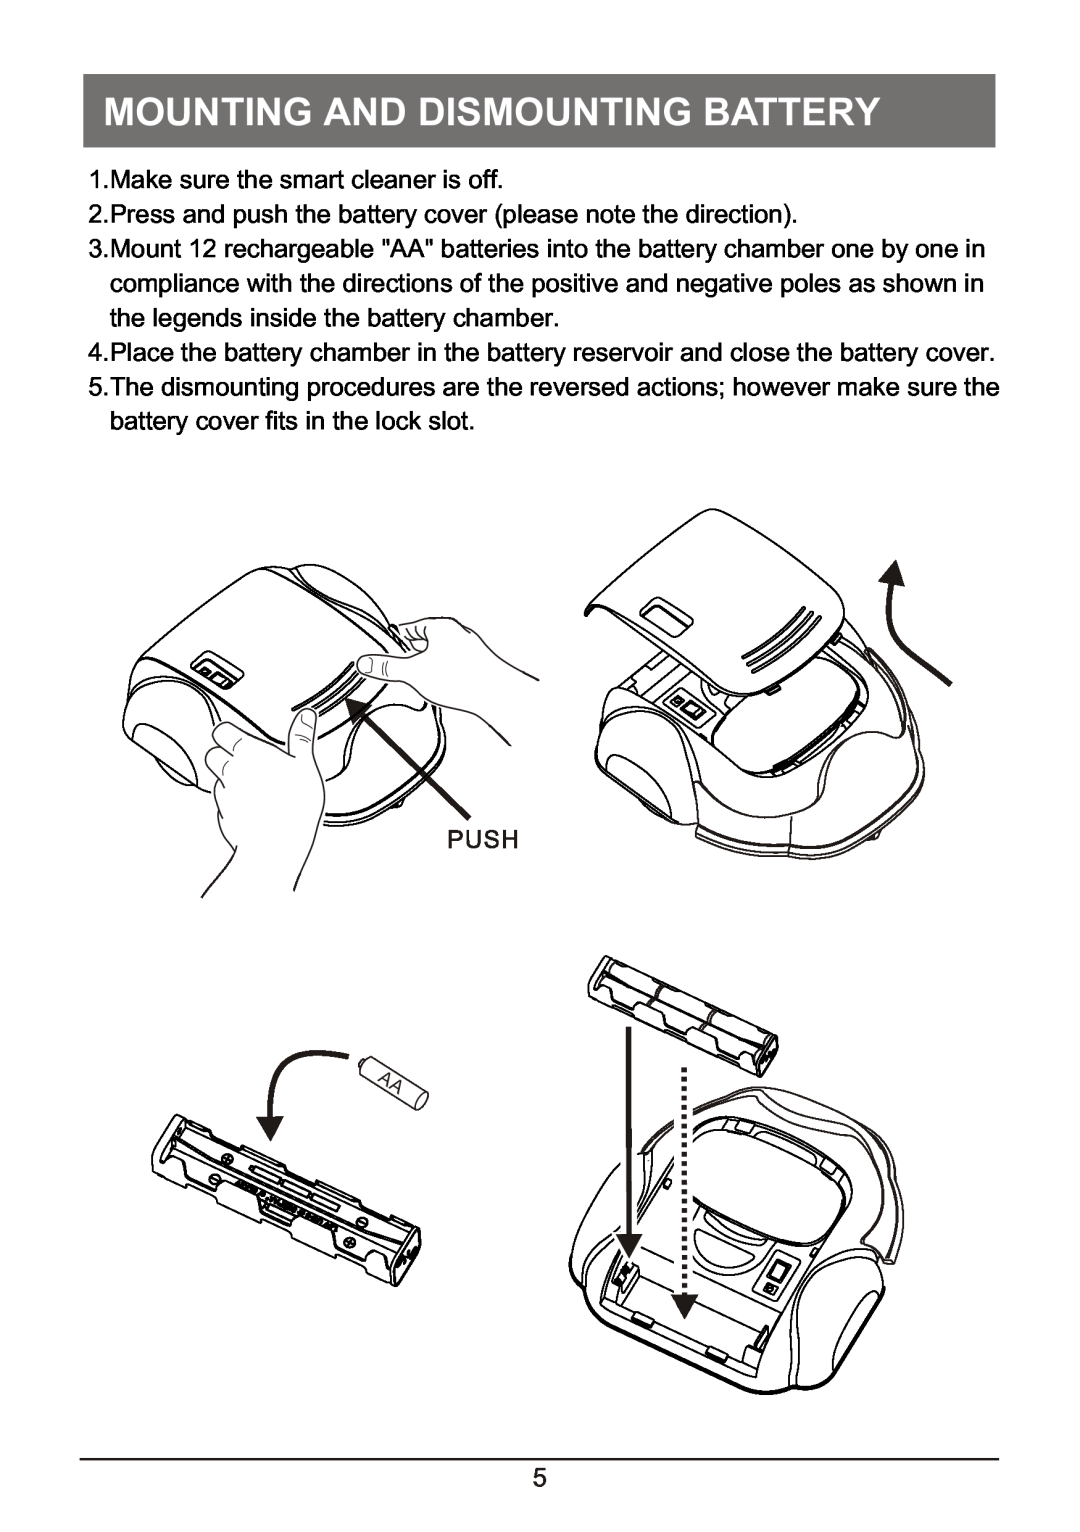 P3 International P4920 operation manual Mounting And Dismounting Battery 